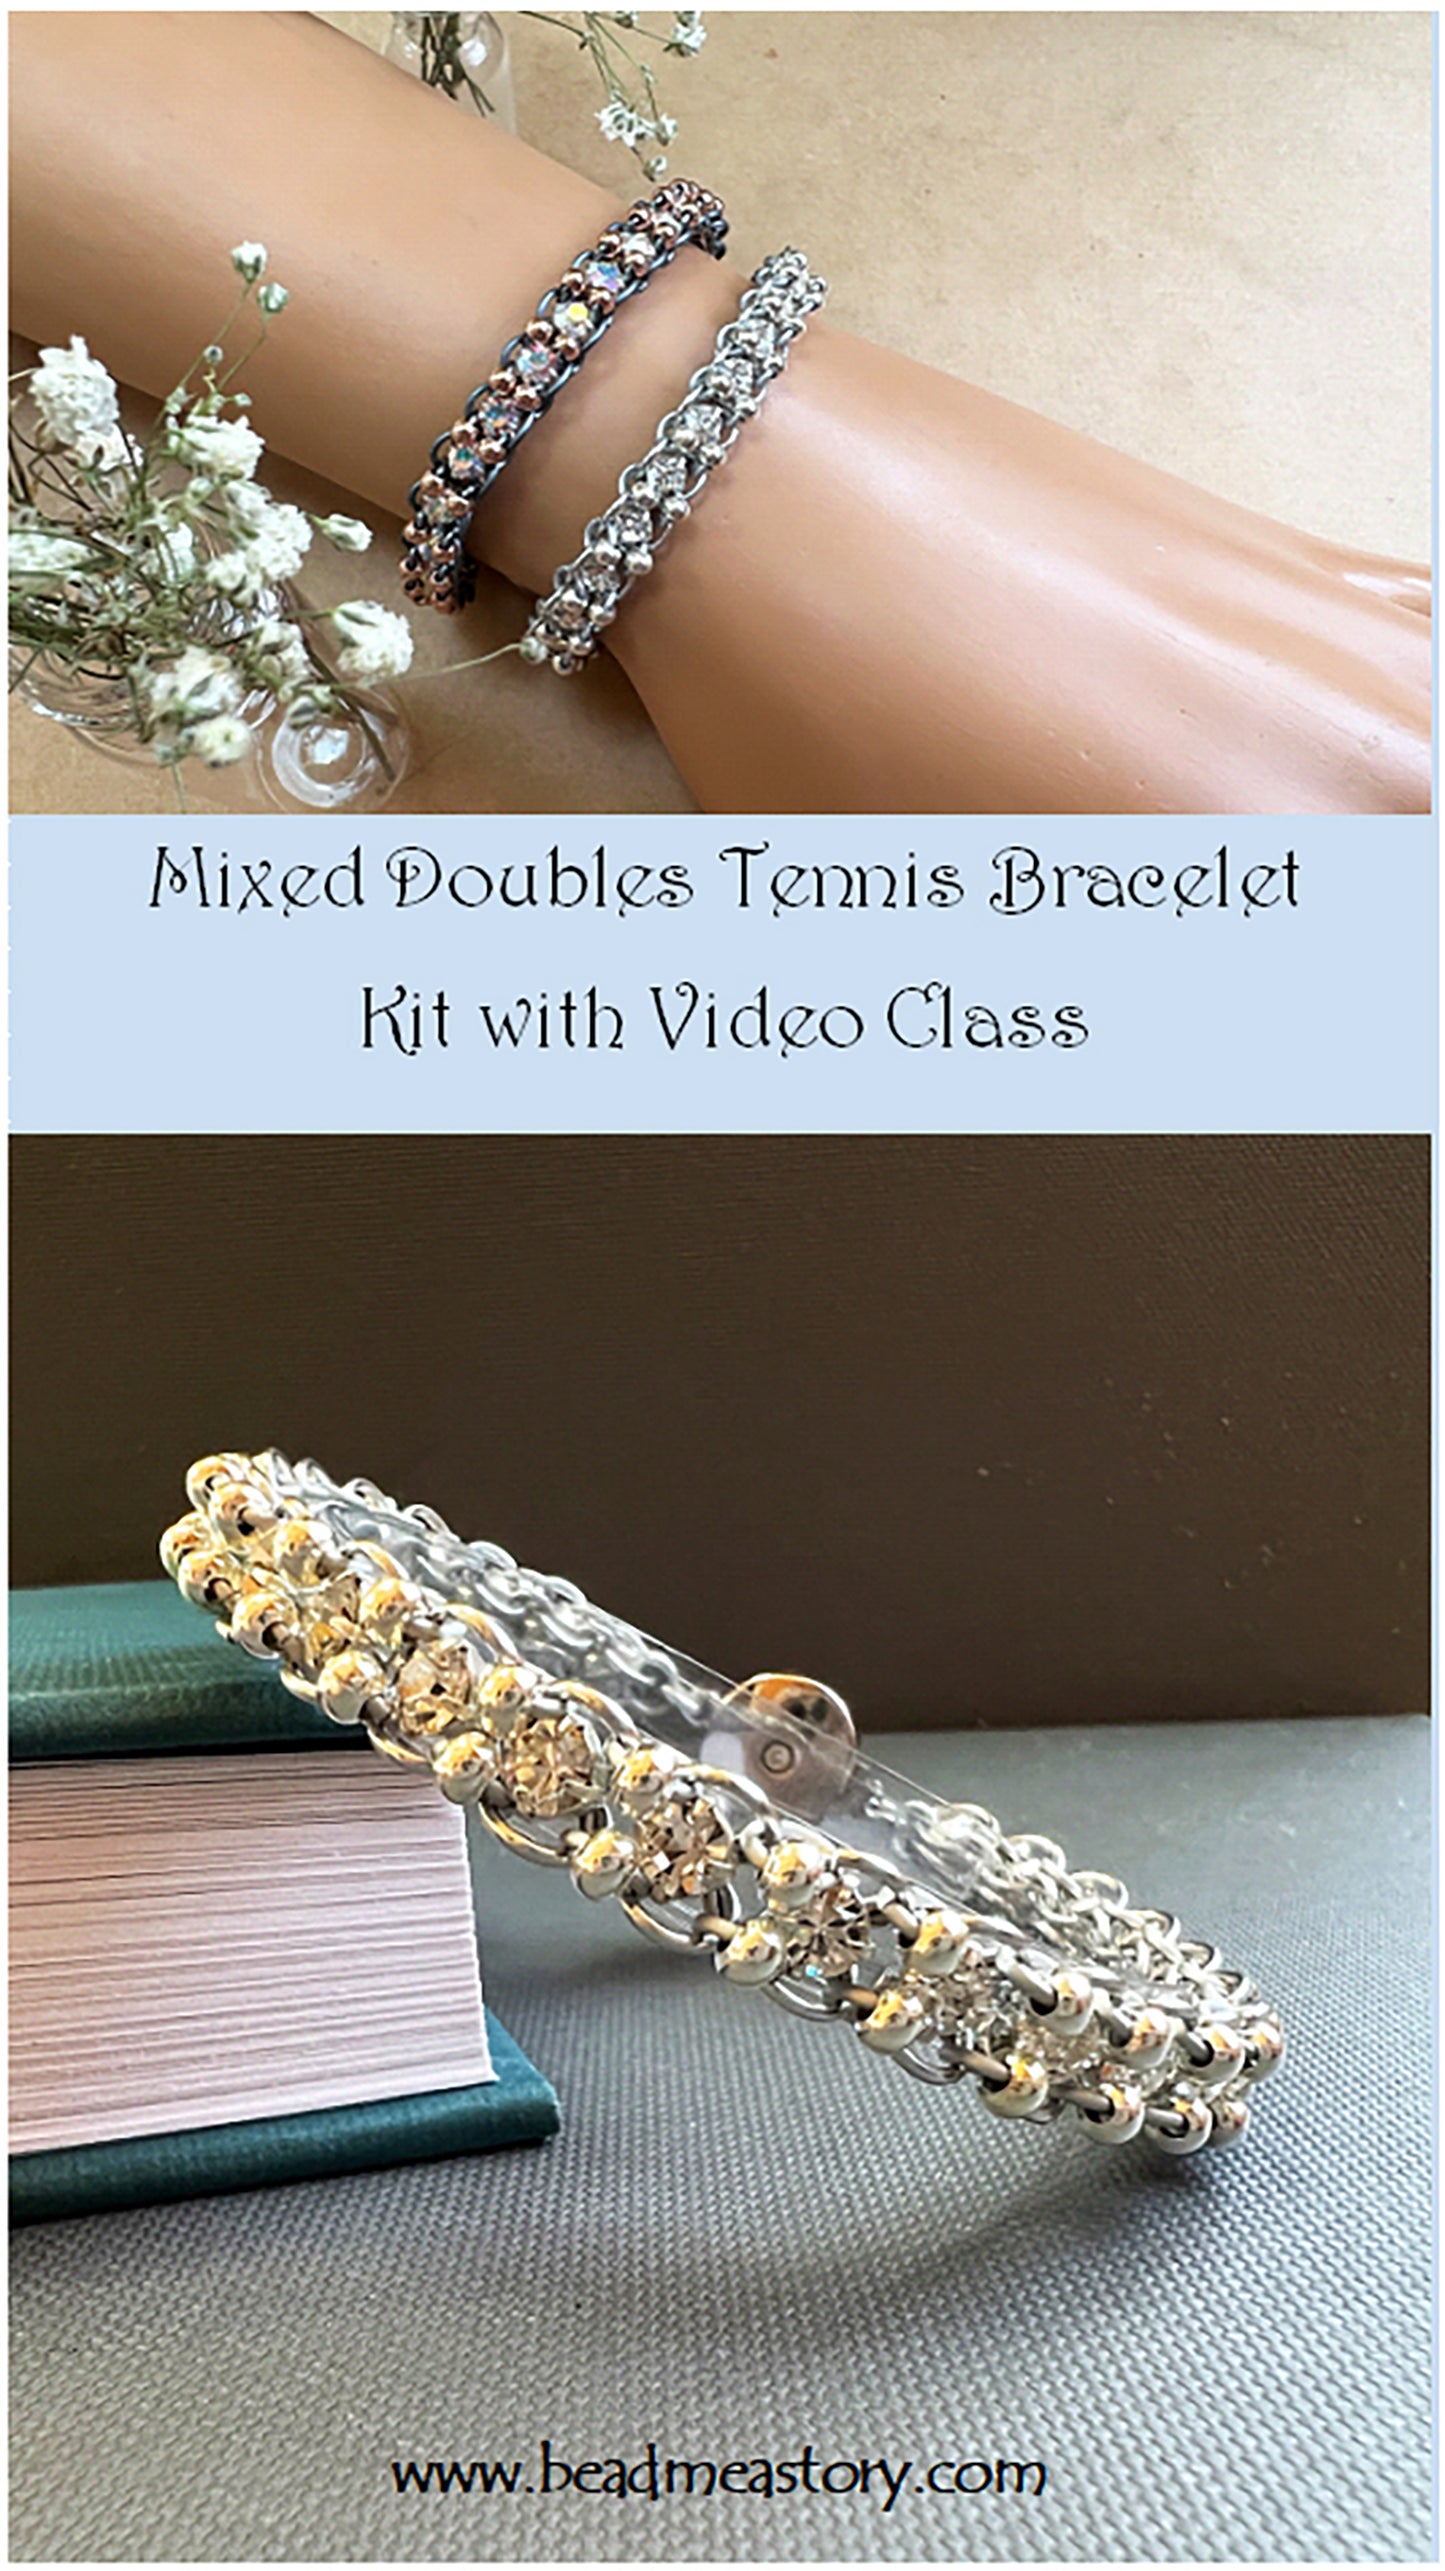 Mixed Doubles Tennis Bracelet Kit with Video Class Silver Frost and Crystal